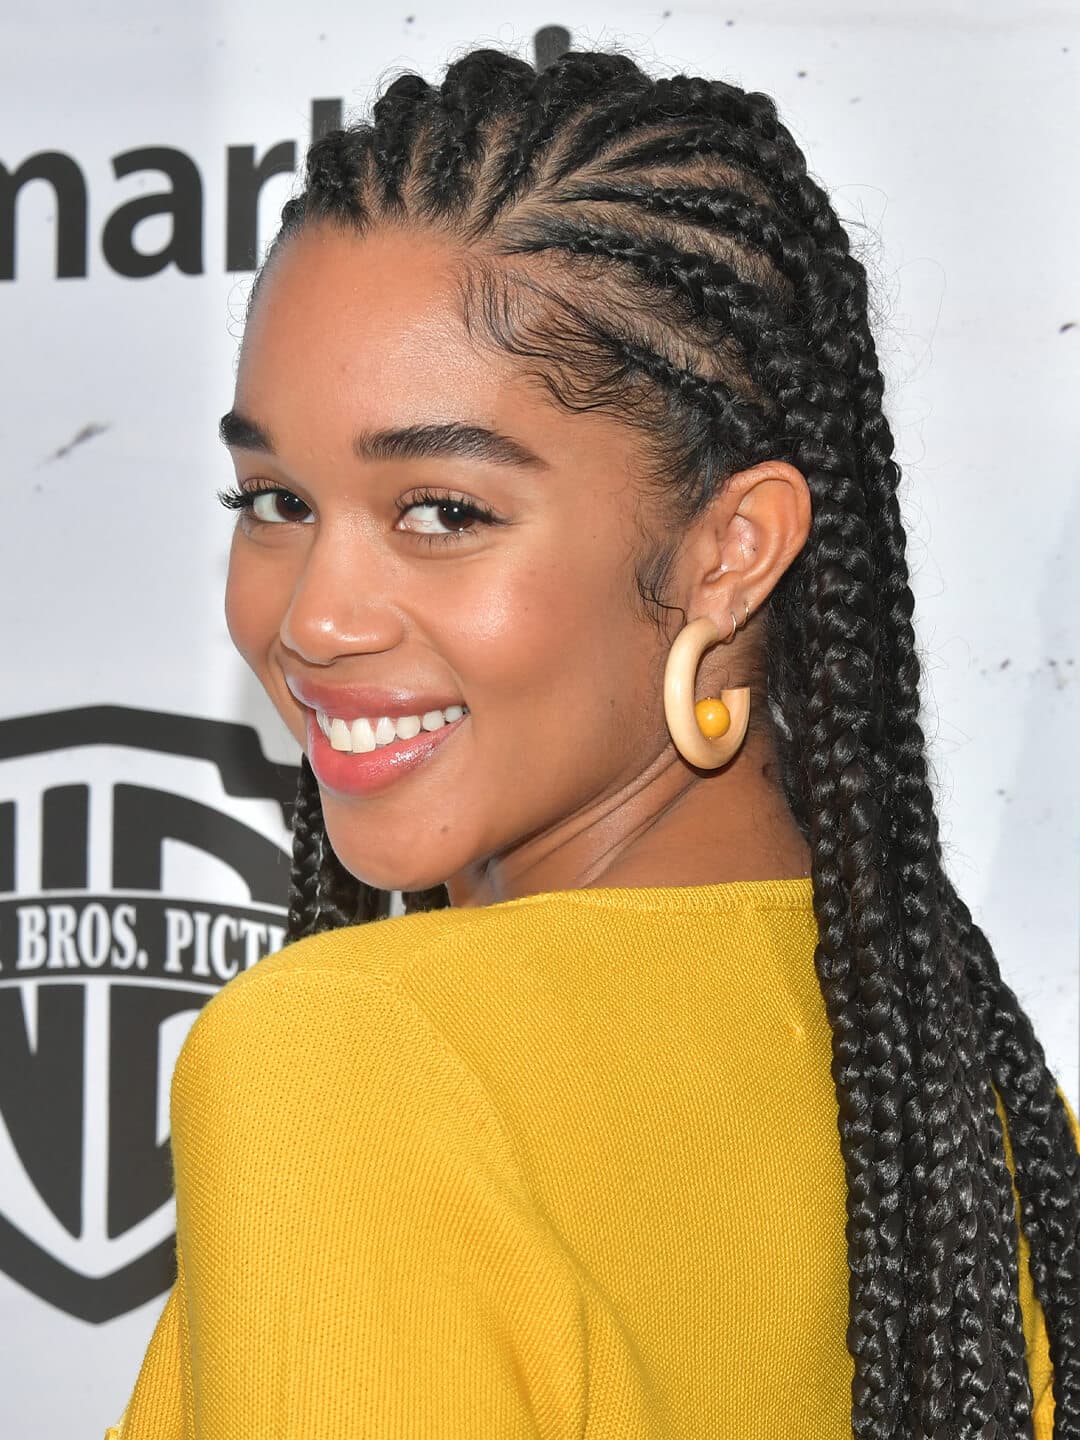 Smiling Laura Harrier wearing a yellow dress and hoop earrings, and rocking a long and , goddess braid hairstyle